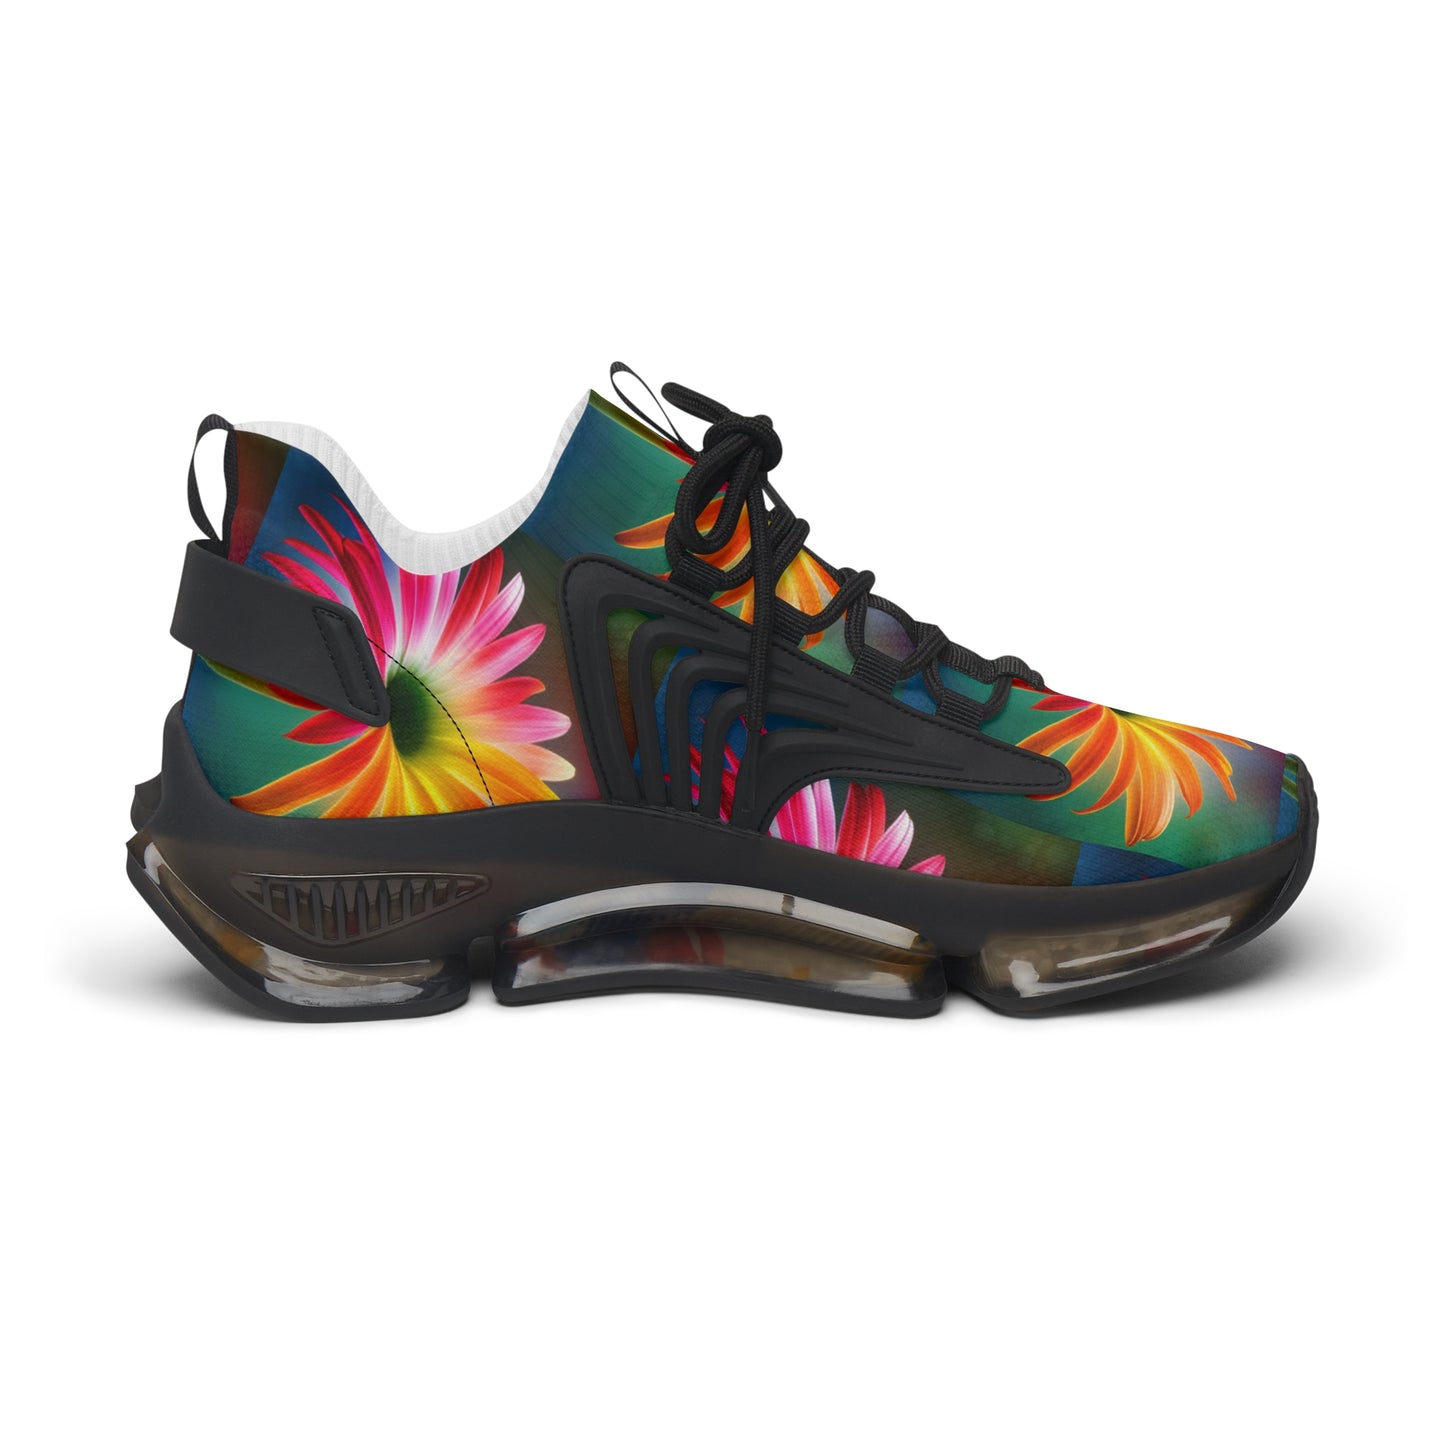 Psychedelic Daisy Sneakers